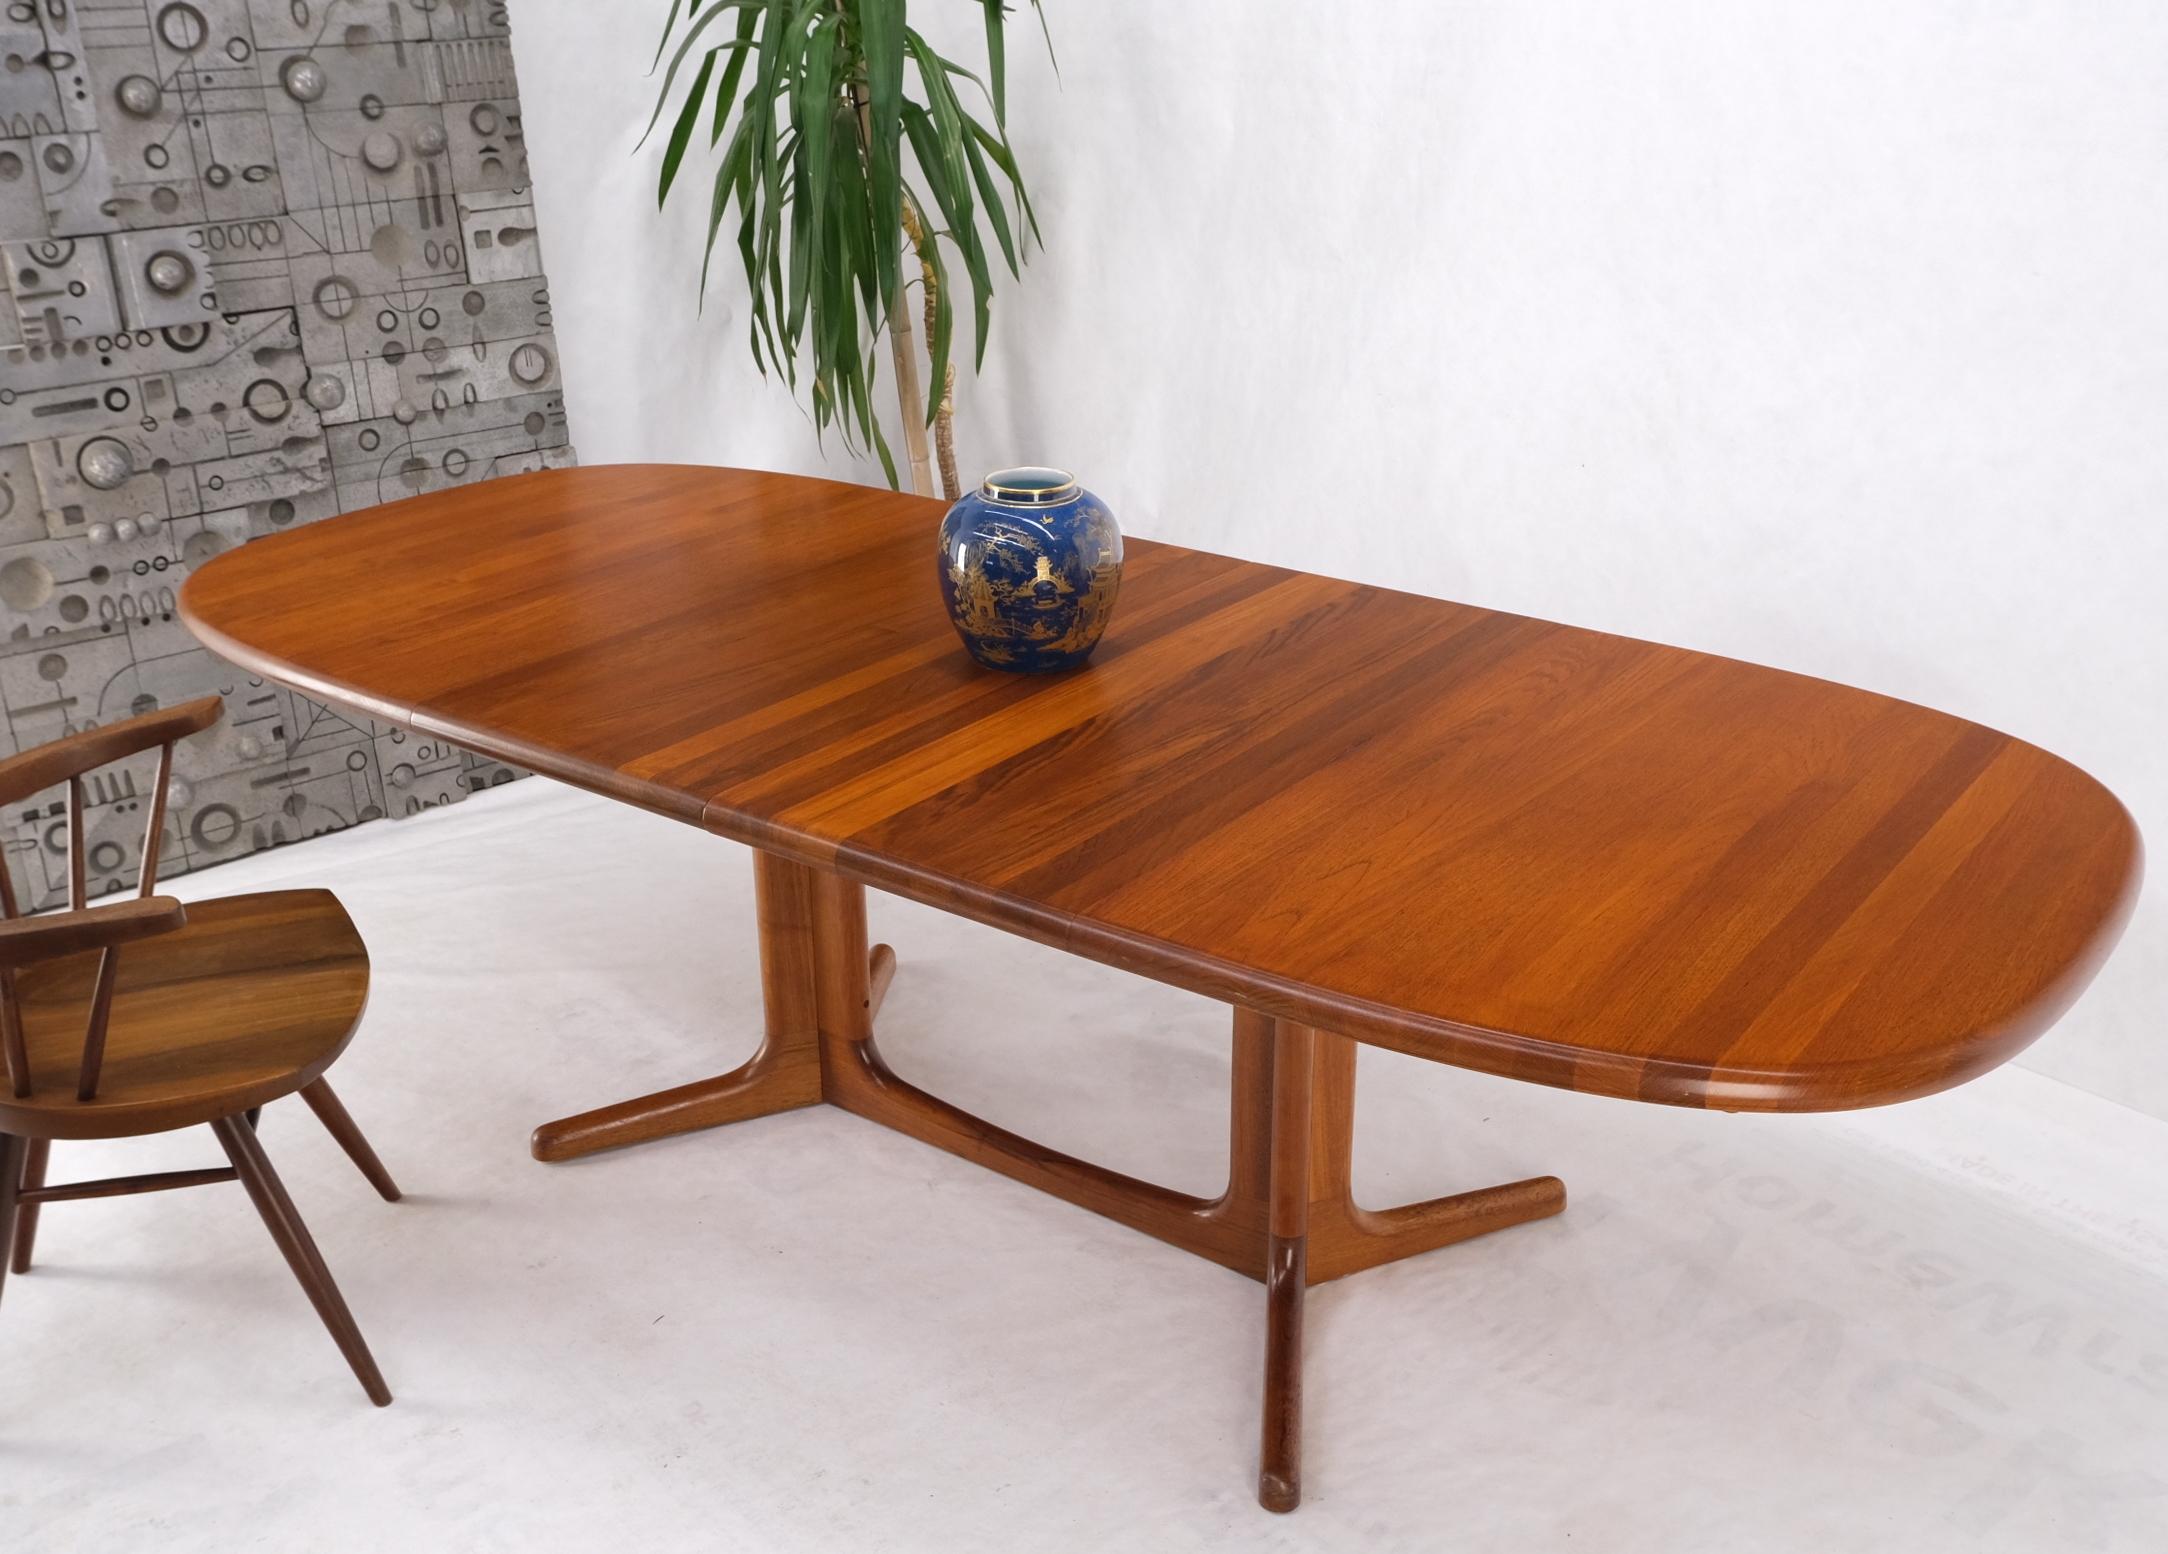 Solid teak oval danish mid century dining conference table 2 extension leaves.
Extension boards storage compartment.
Two table leaves each measuring 18'' across.